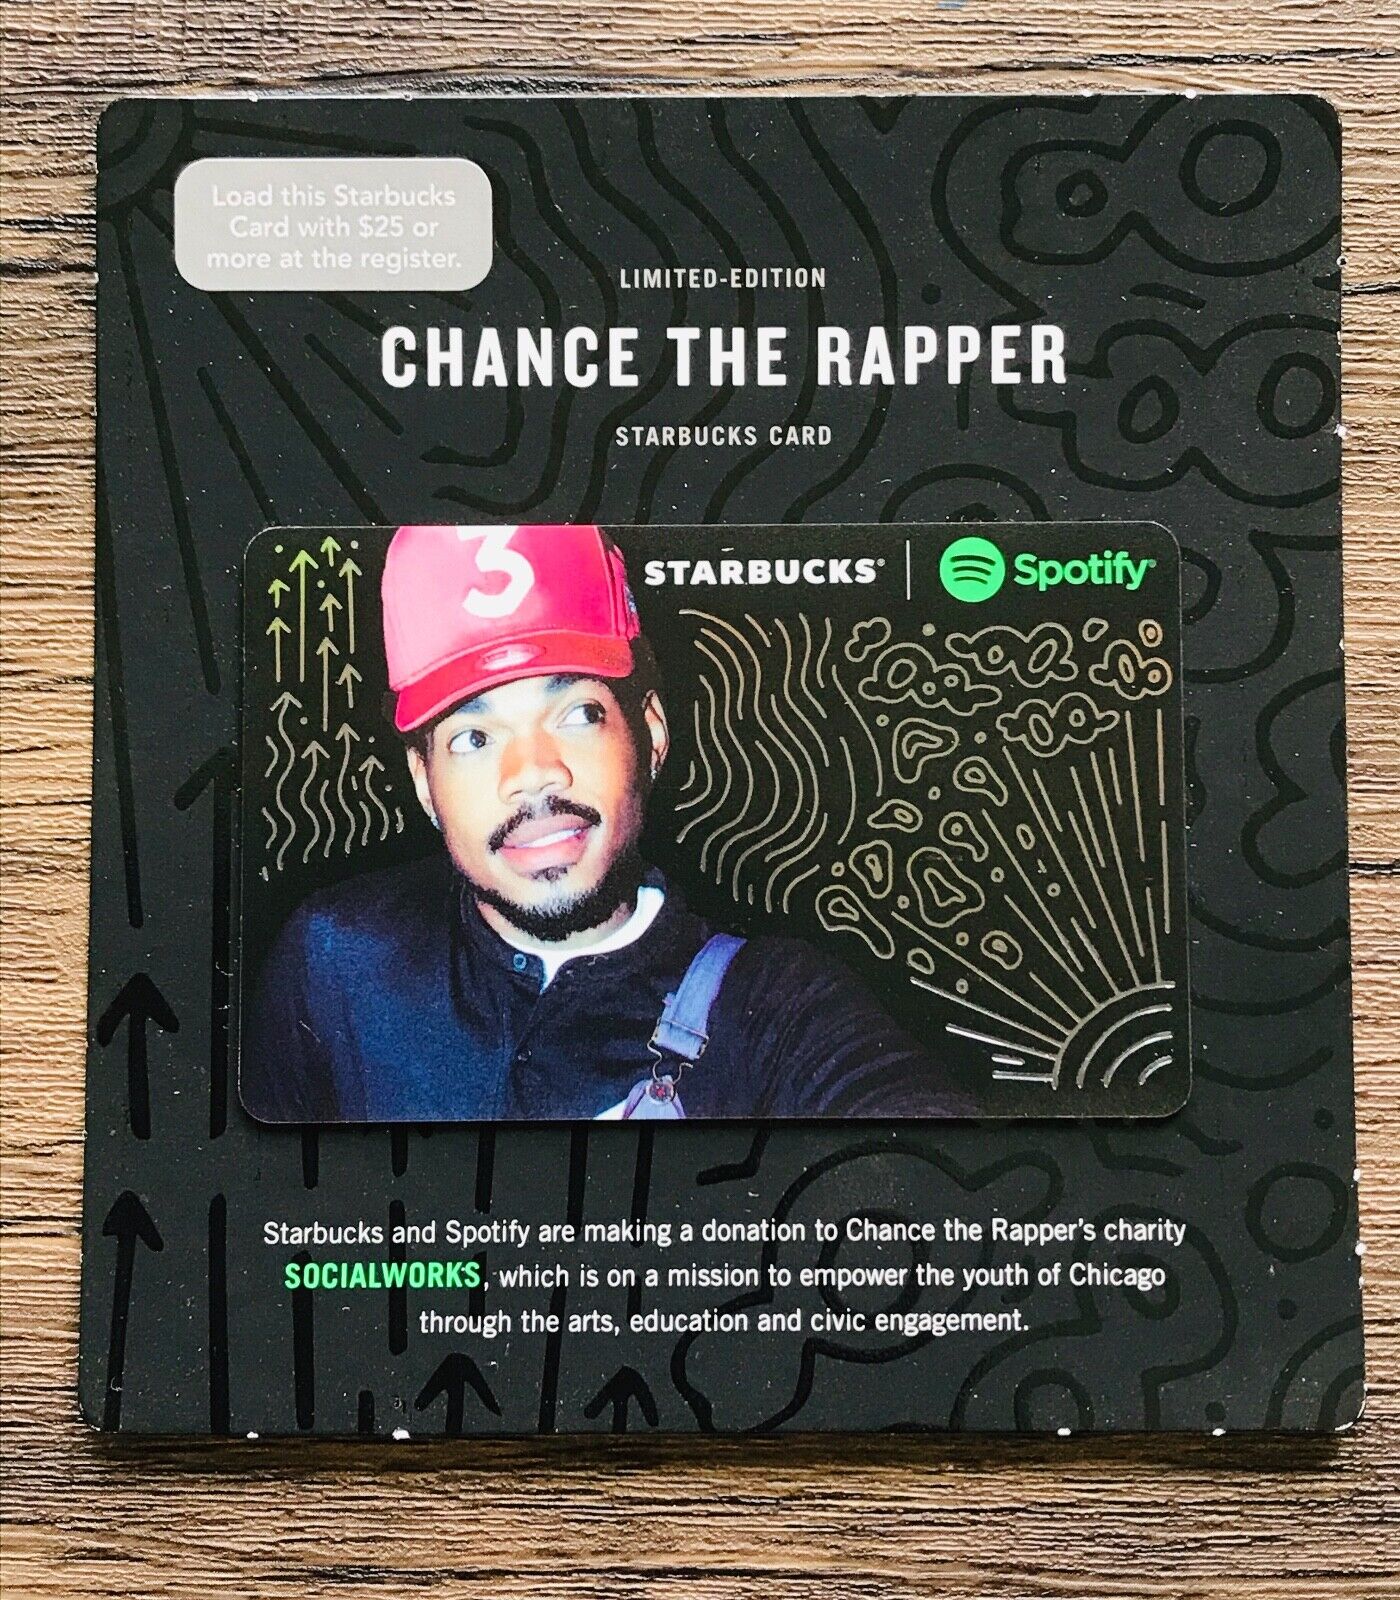 2017 Starbucks Card CHANCE THE RAPPER LIMITED Edition Spotify Mint New #6146 